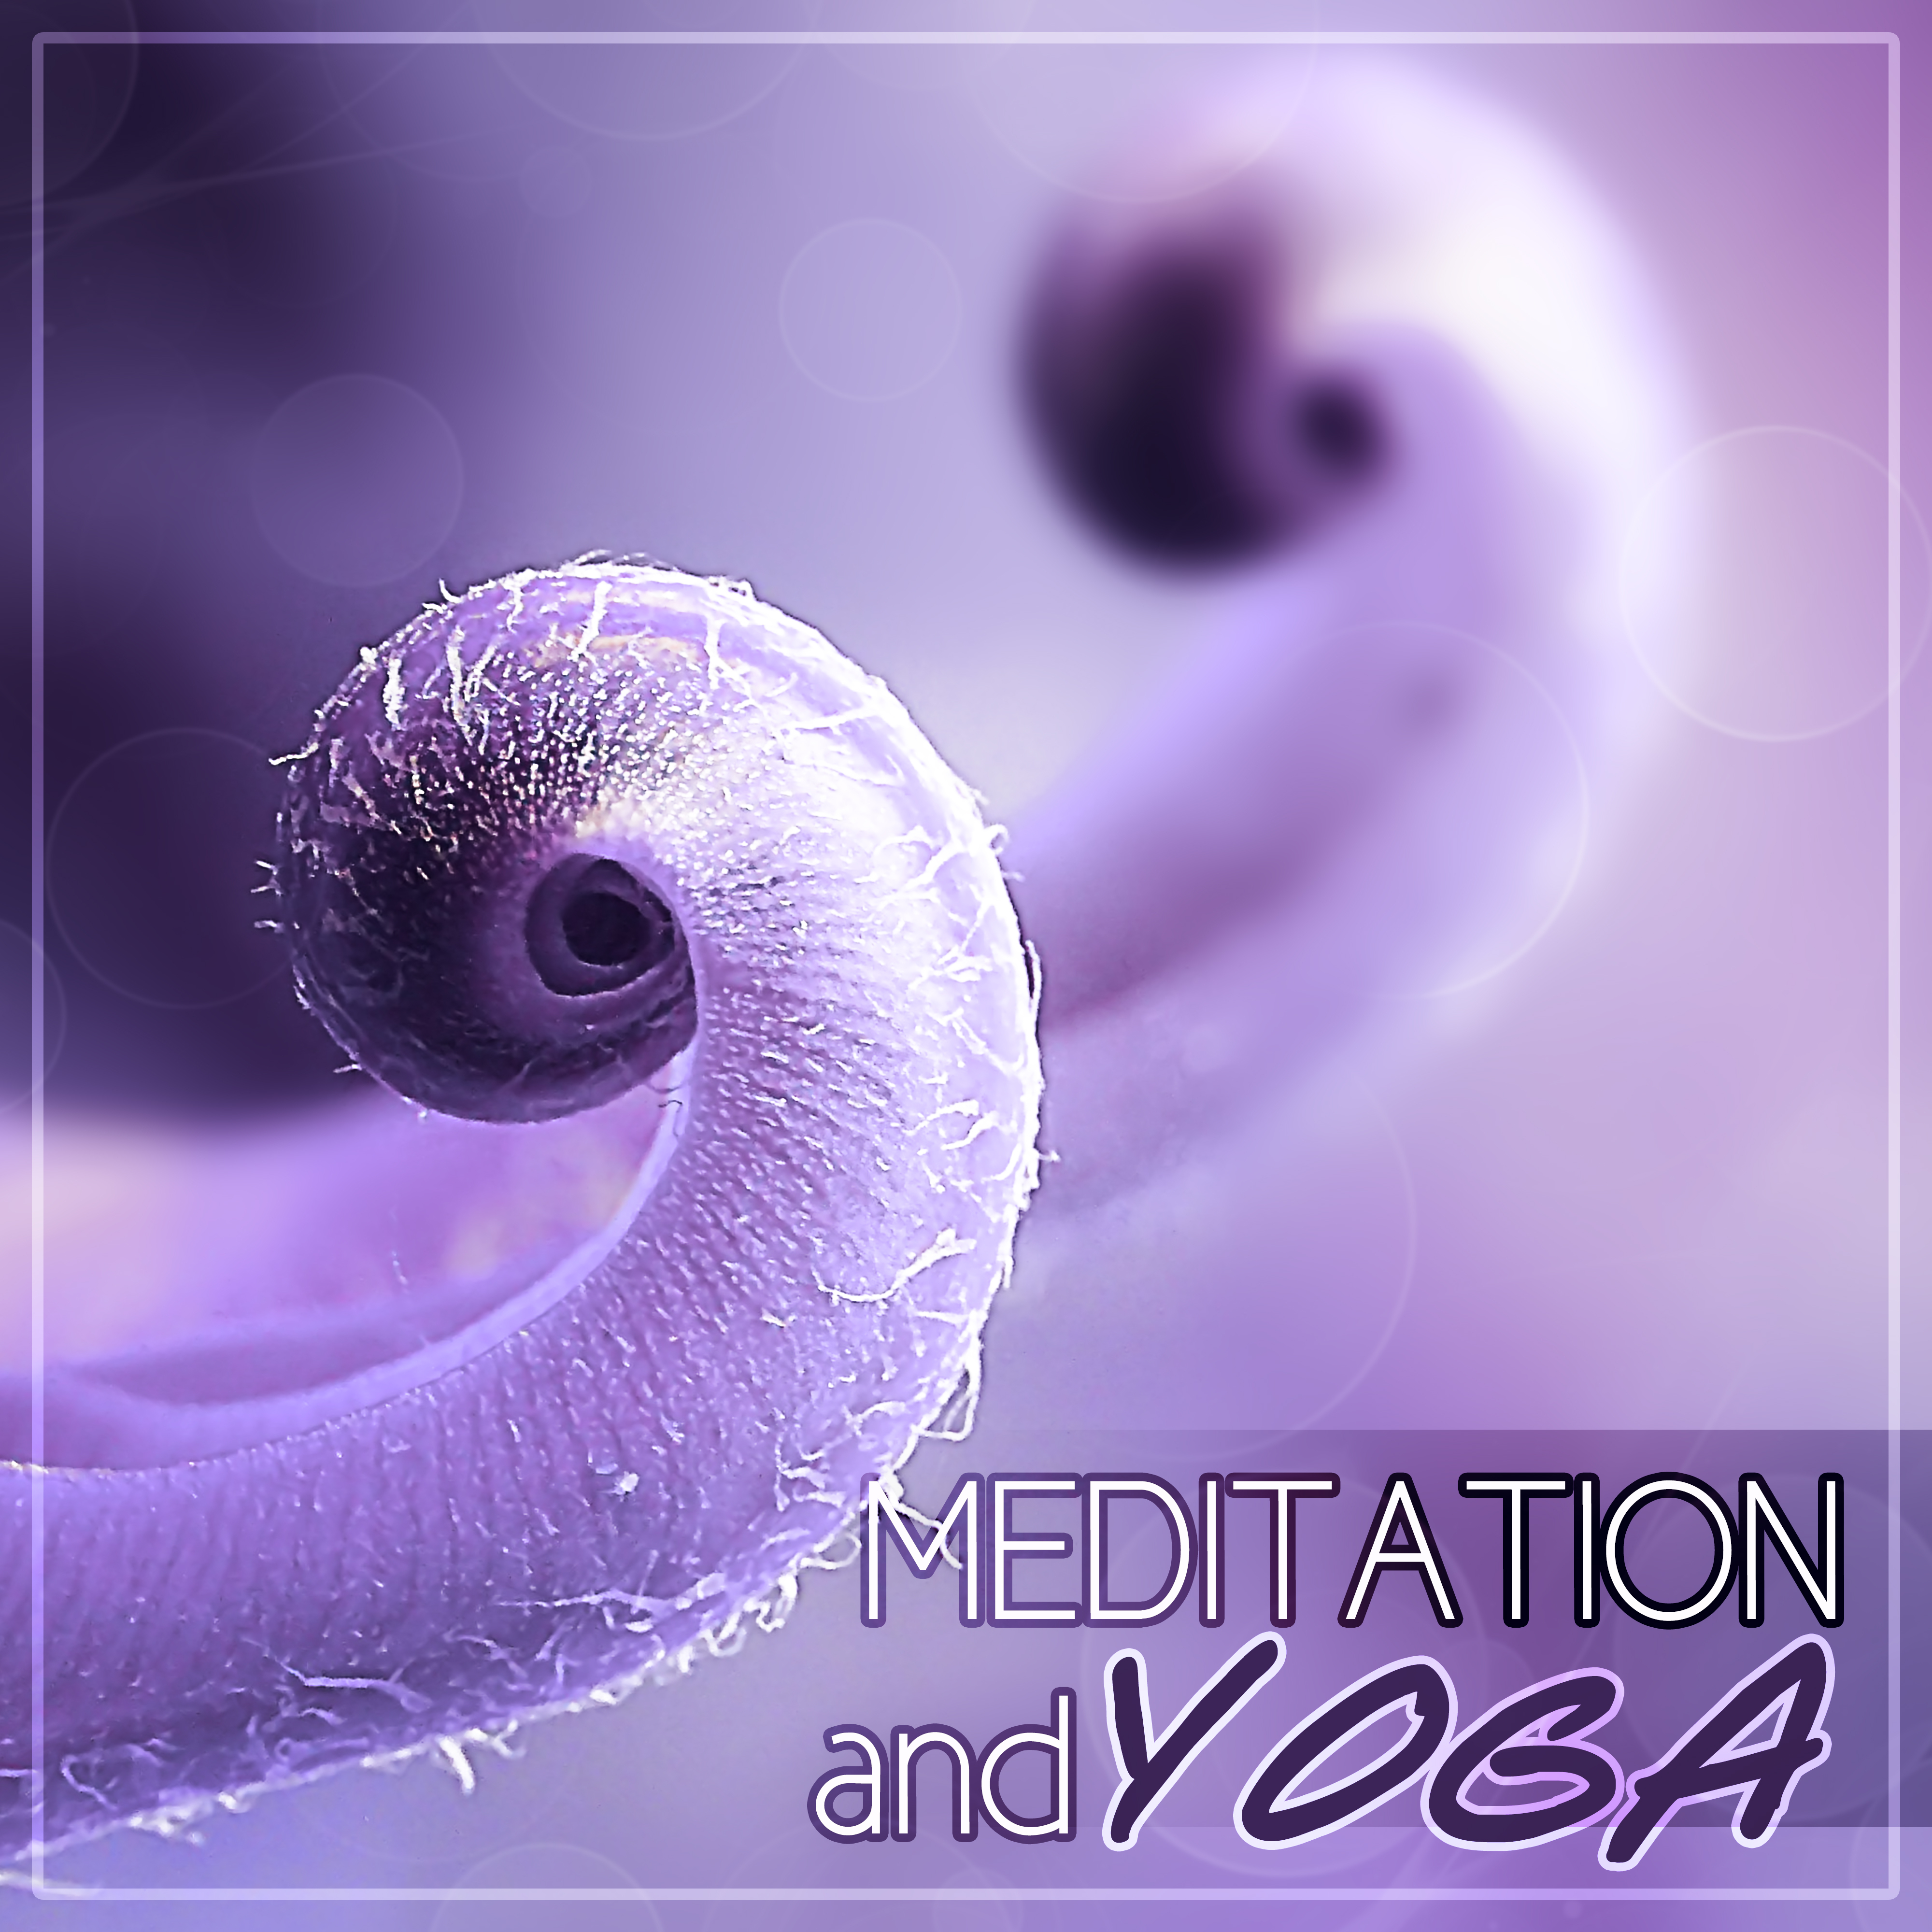 Meditation and Yoga  Relaxation Music, New Age Music for Mindfulness Meditation